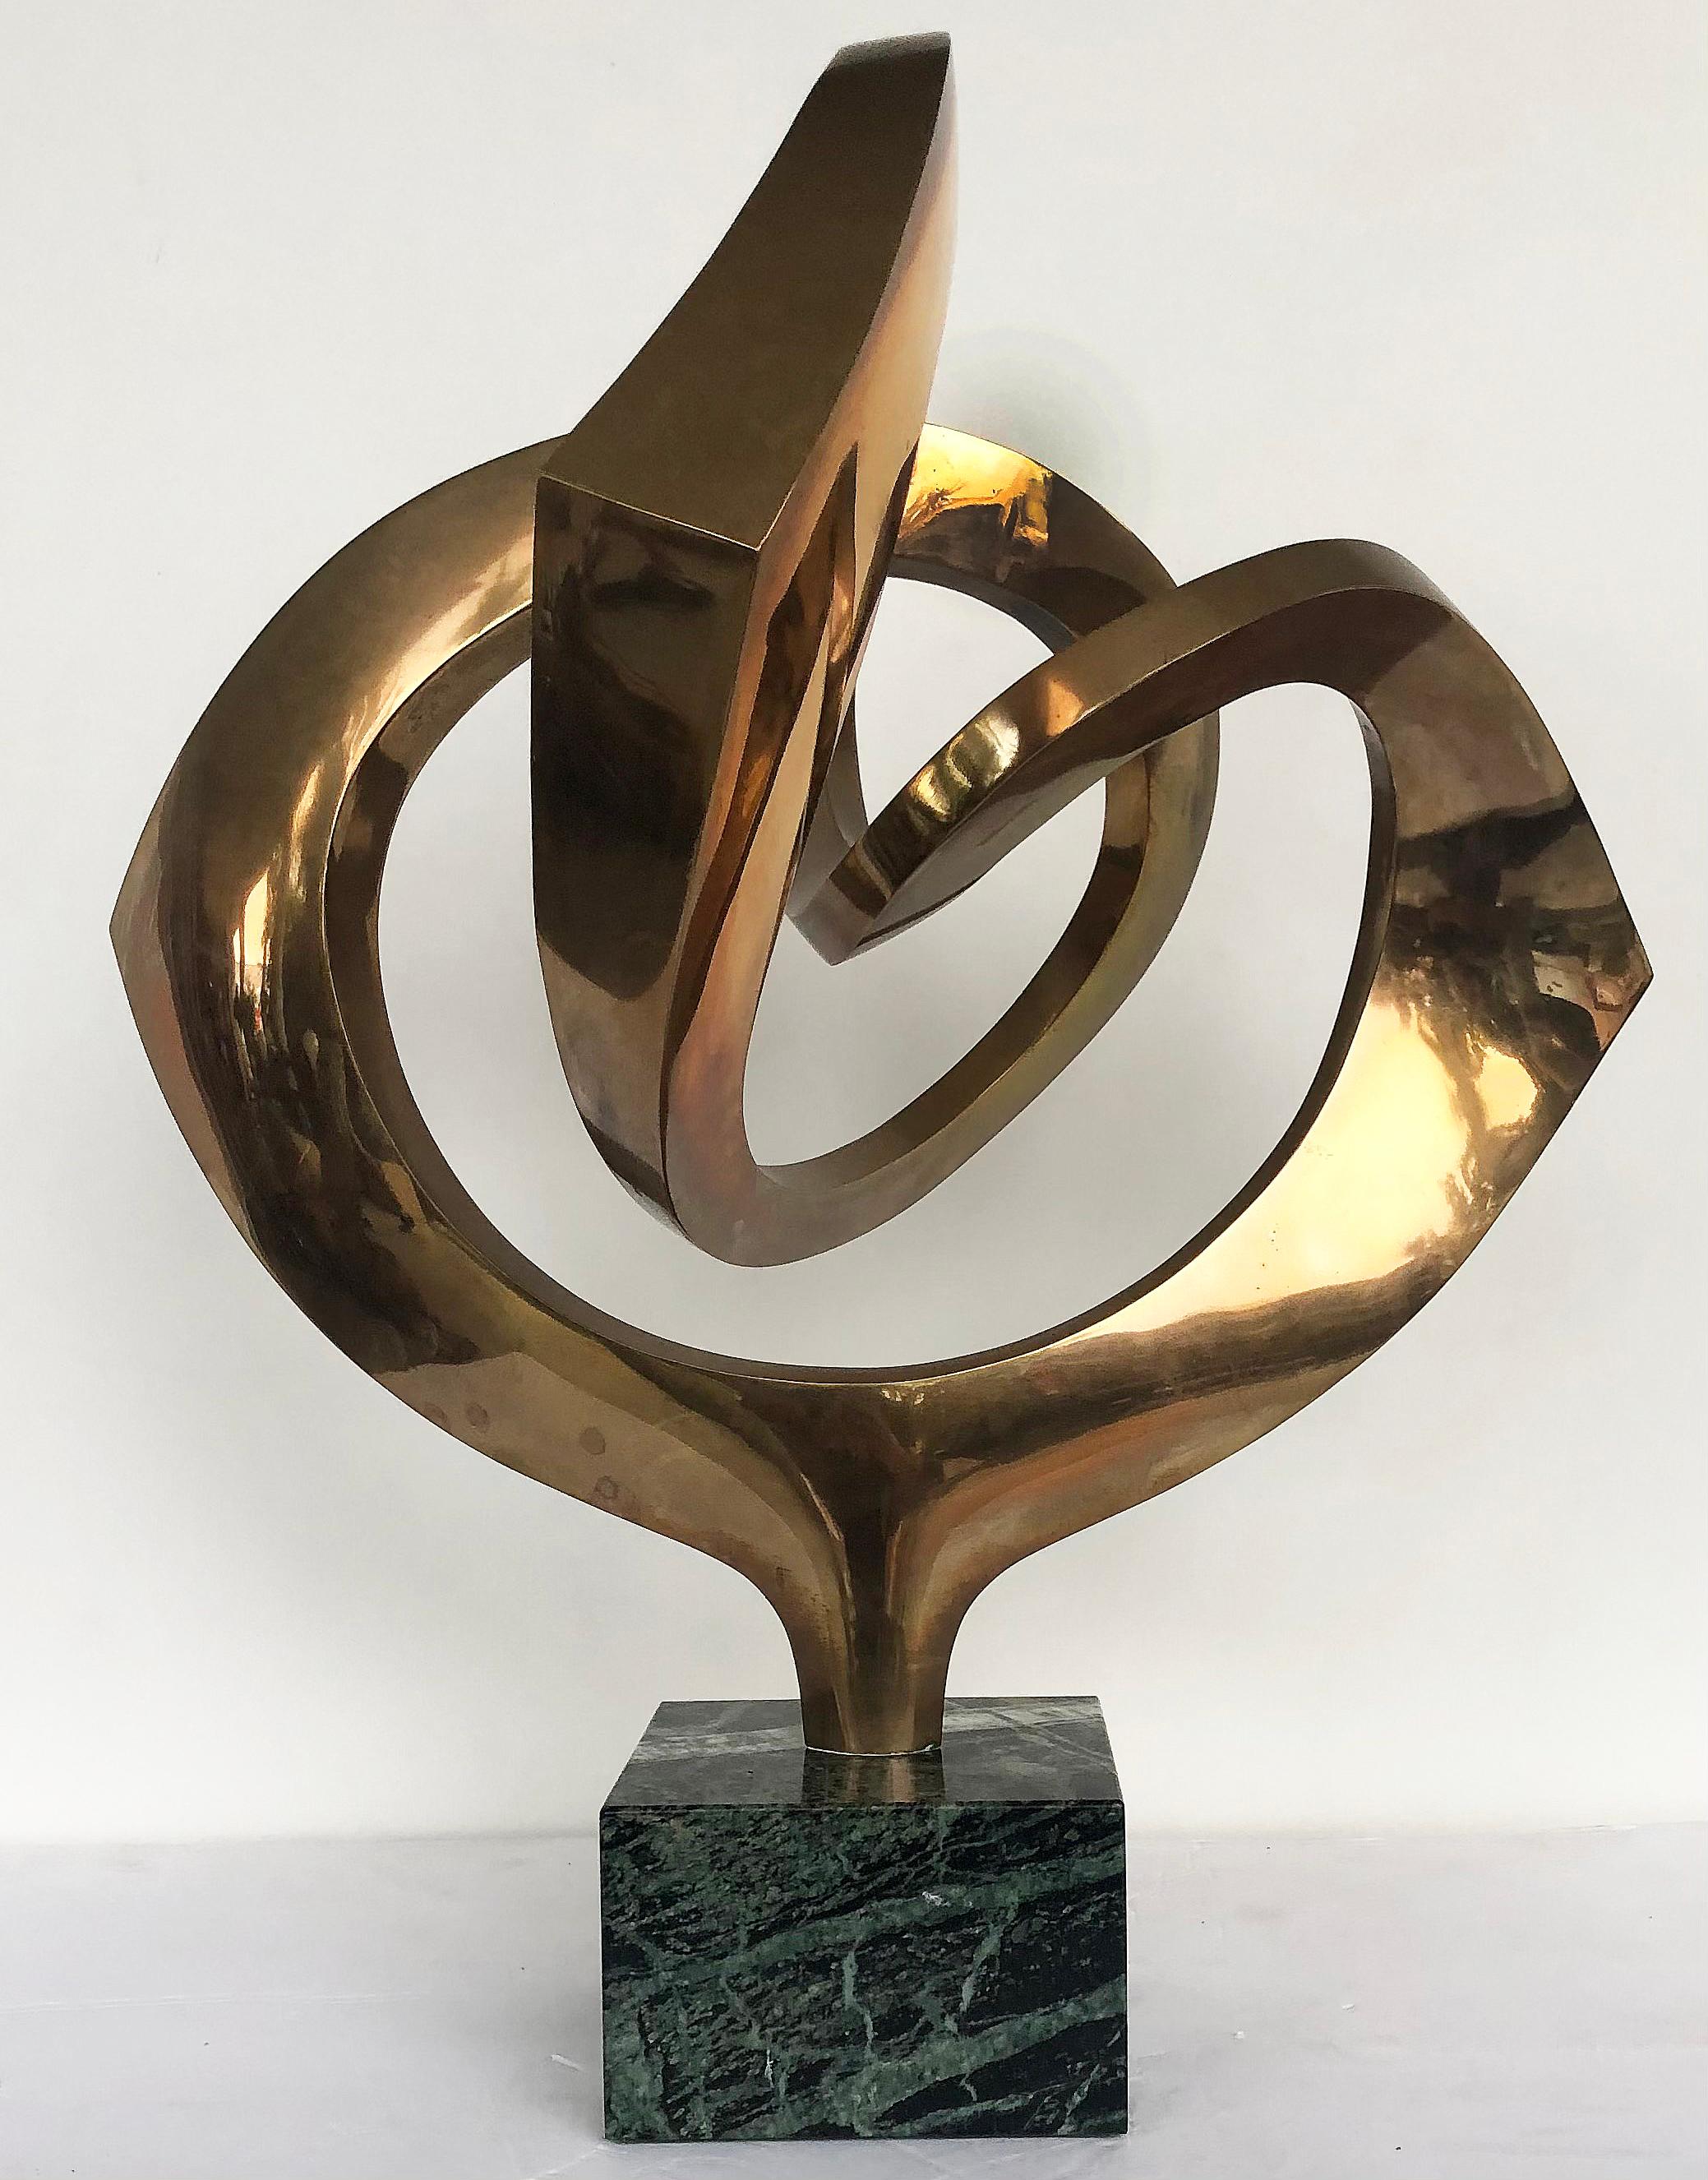 20th Century RJ Mitchell Abstract Sculpture, Polished Brass on Marble Base